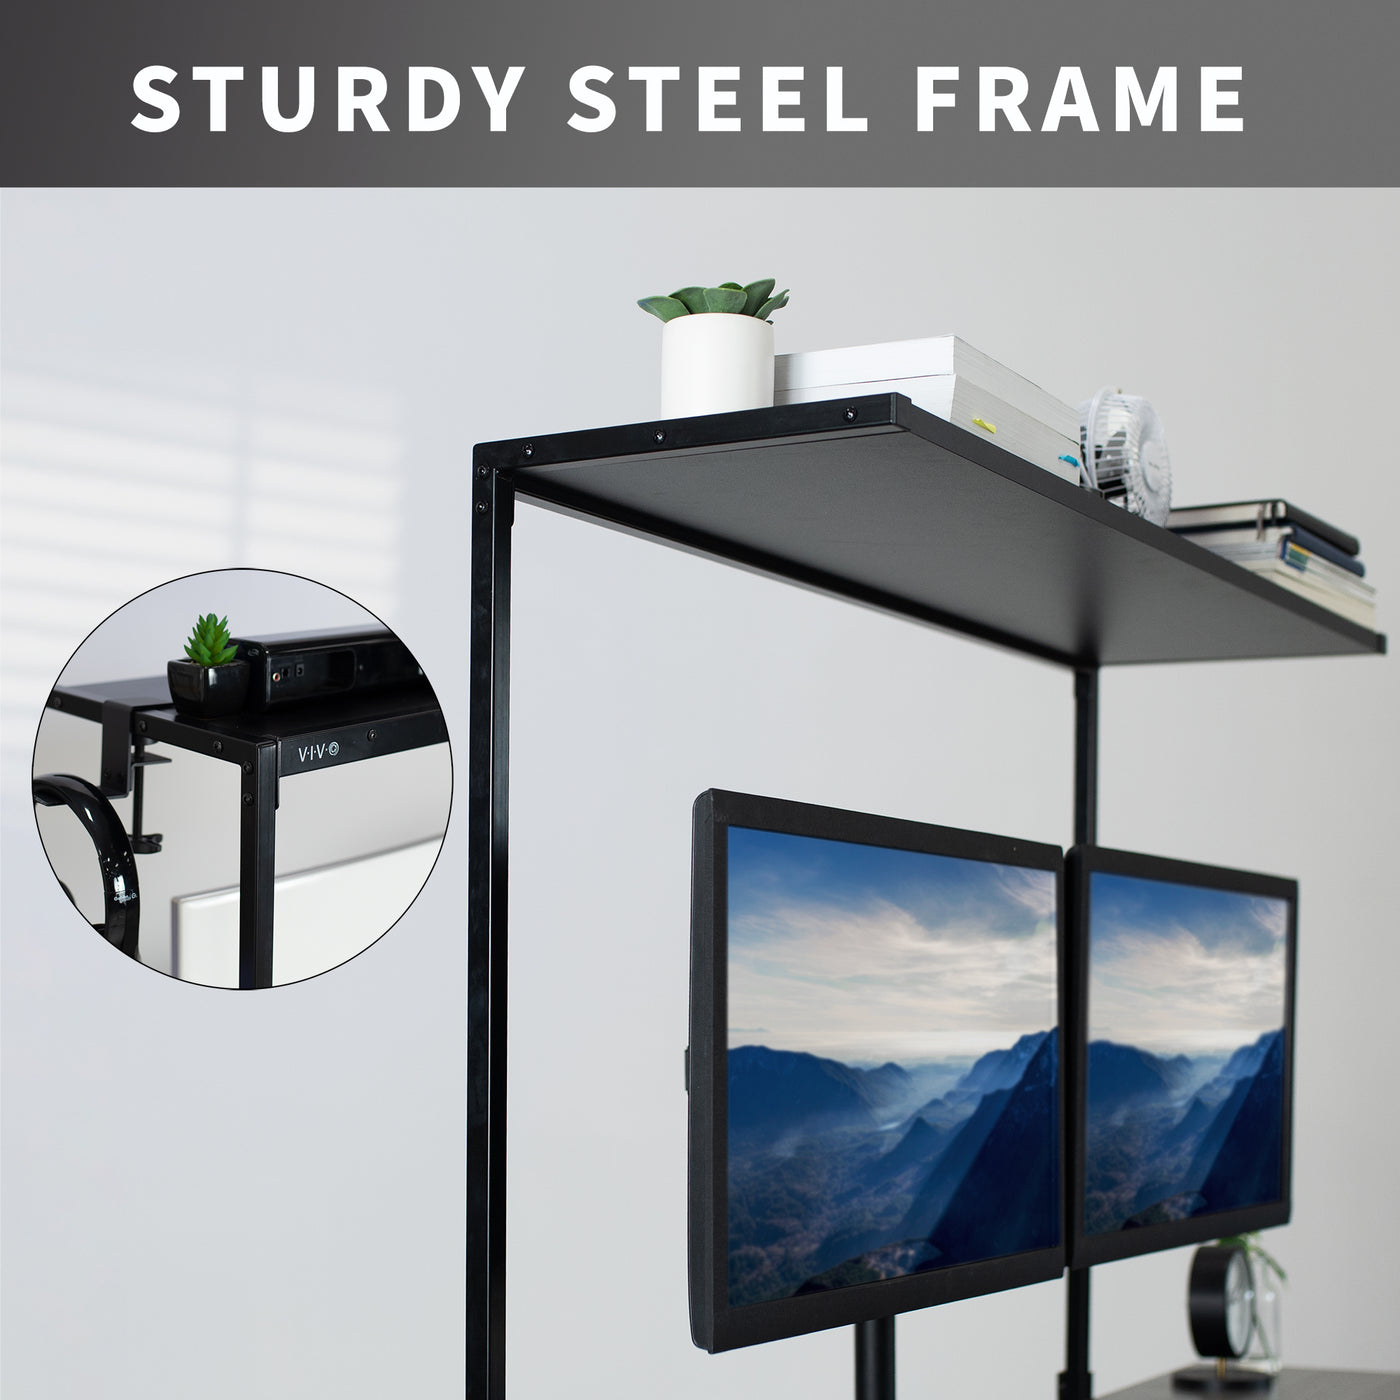 Confidently elevate your expensive office appliances with a sturdy steel frame of an overhead shelf.